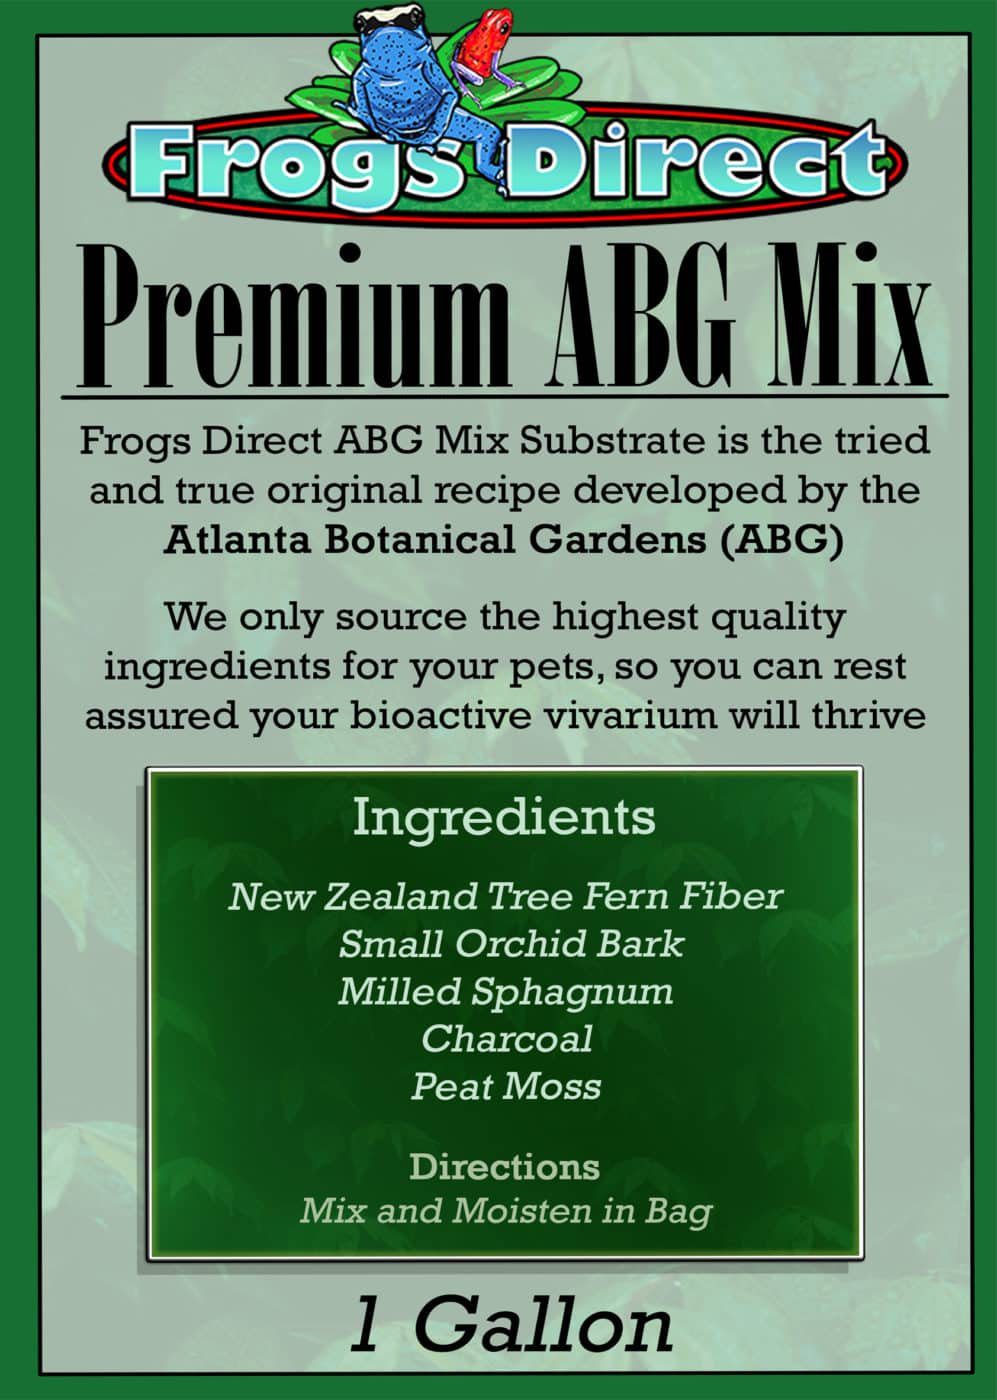 Frogs direct ABG mix label